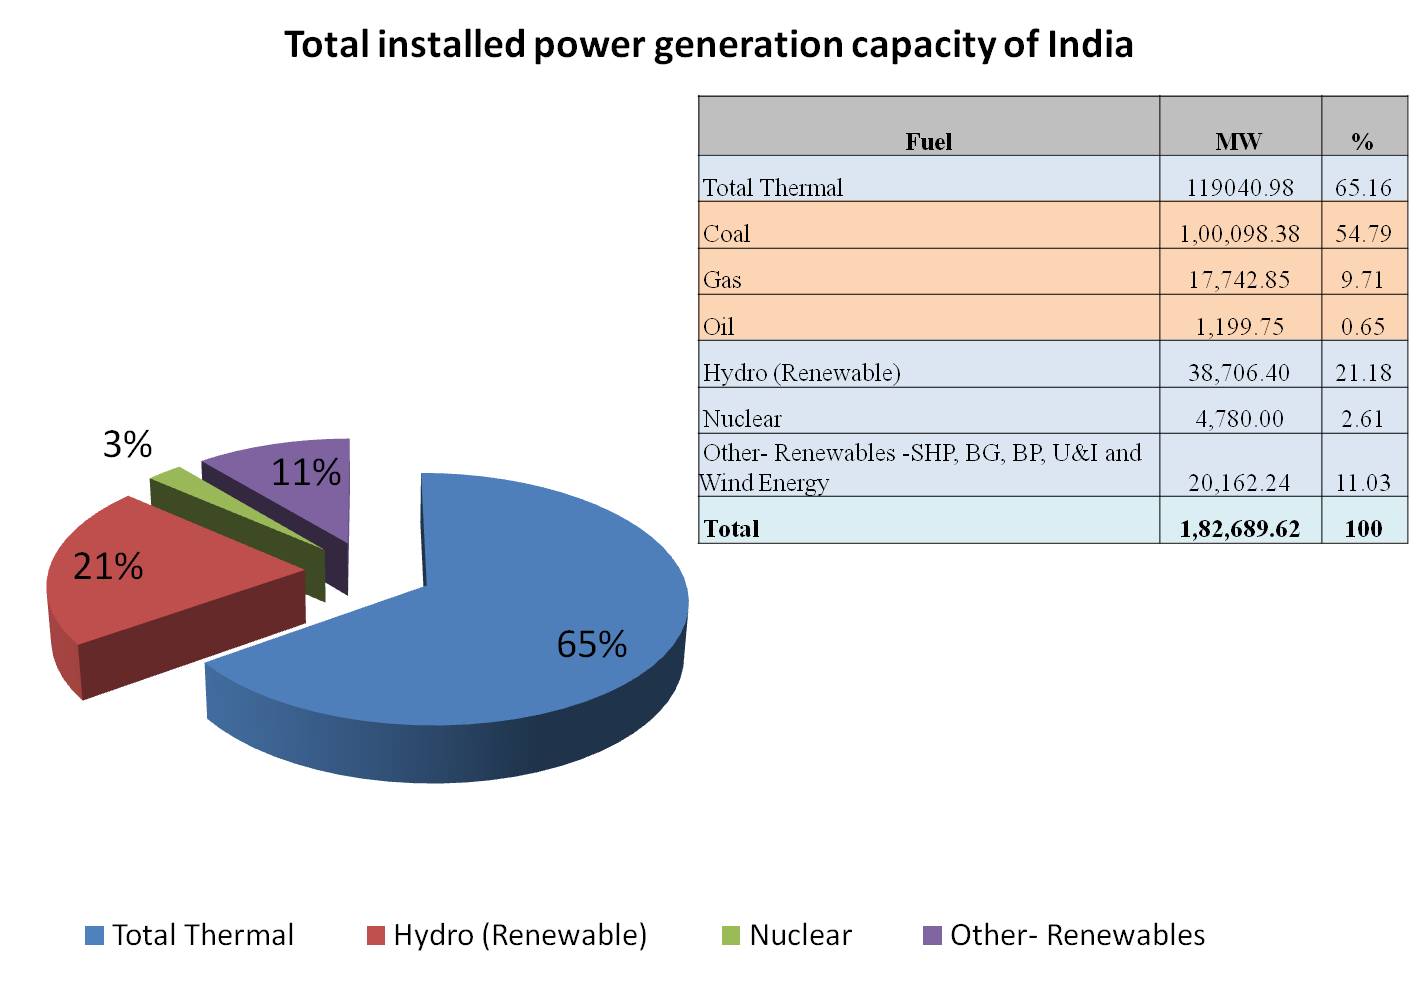 Total installed power generation capacity of India as per the data of Oct 2011